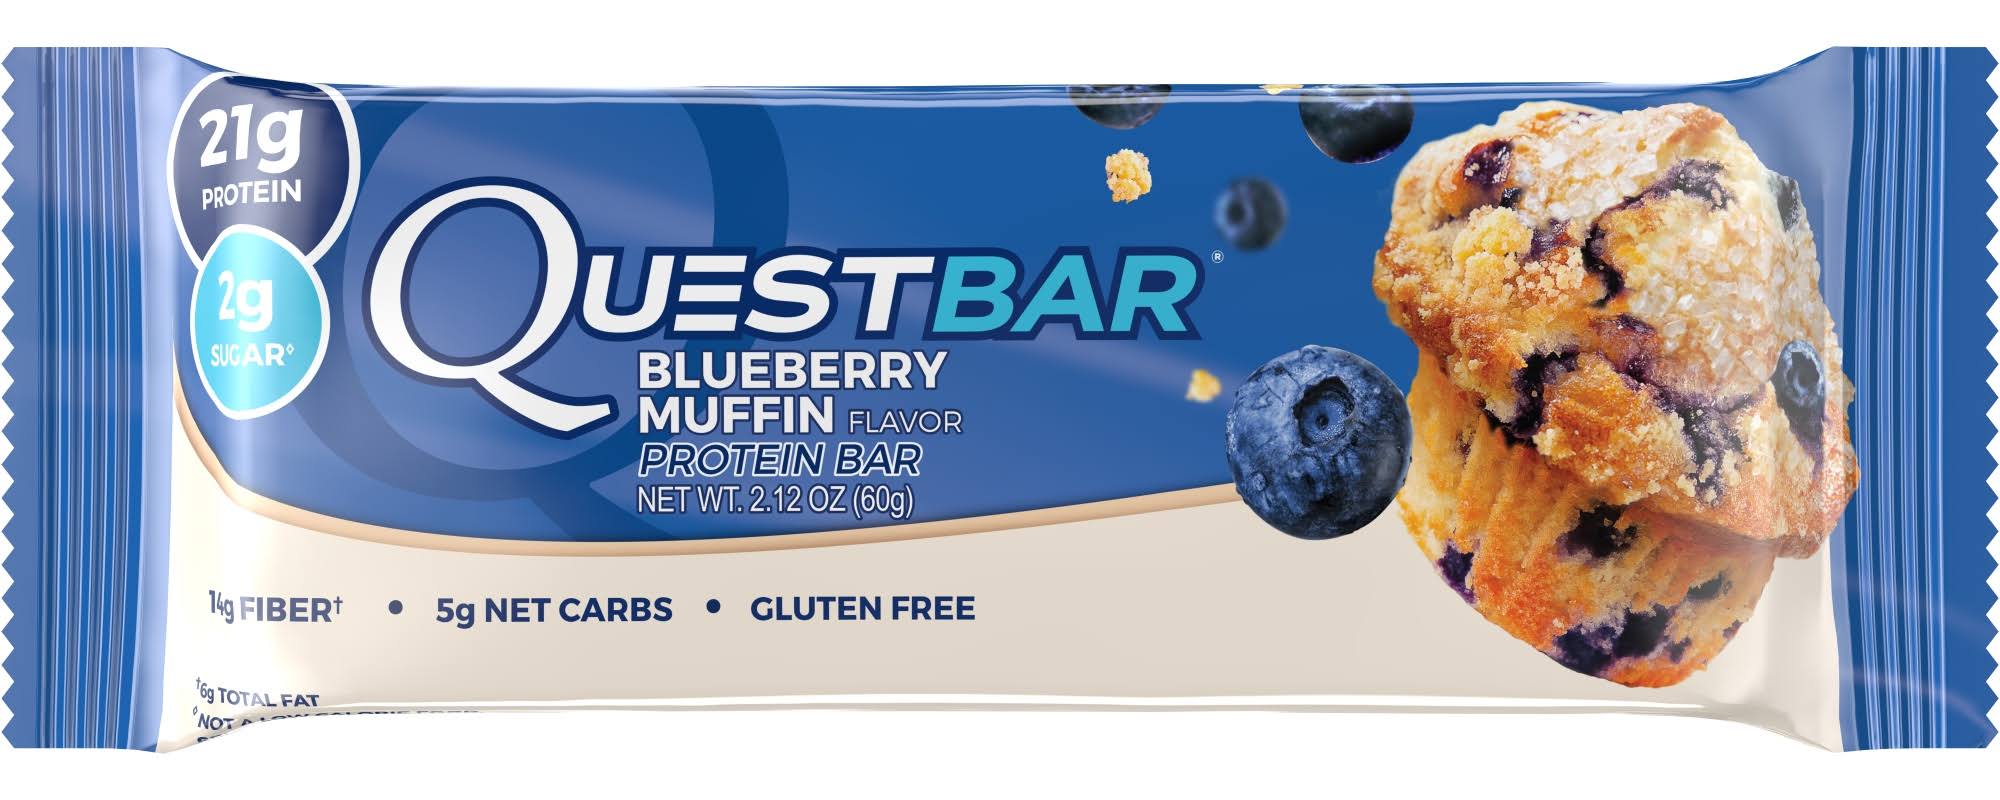 Quest Oatmeal - Blueberry Muffin, 21g